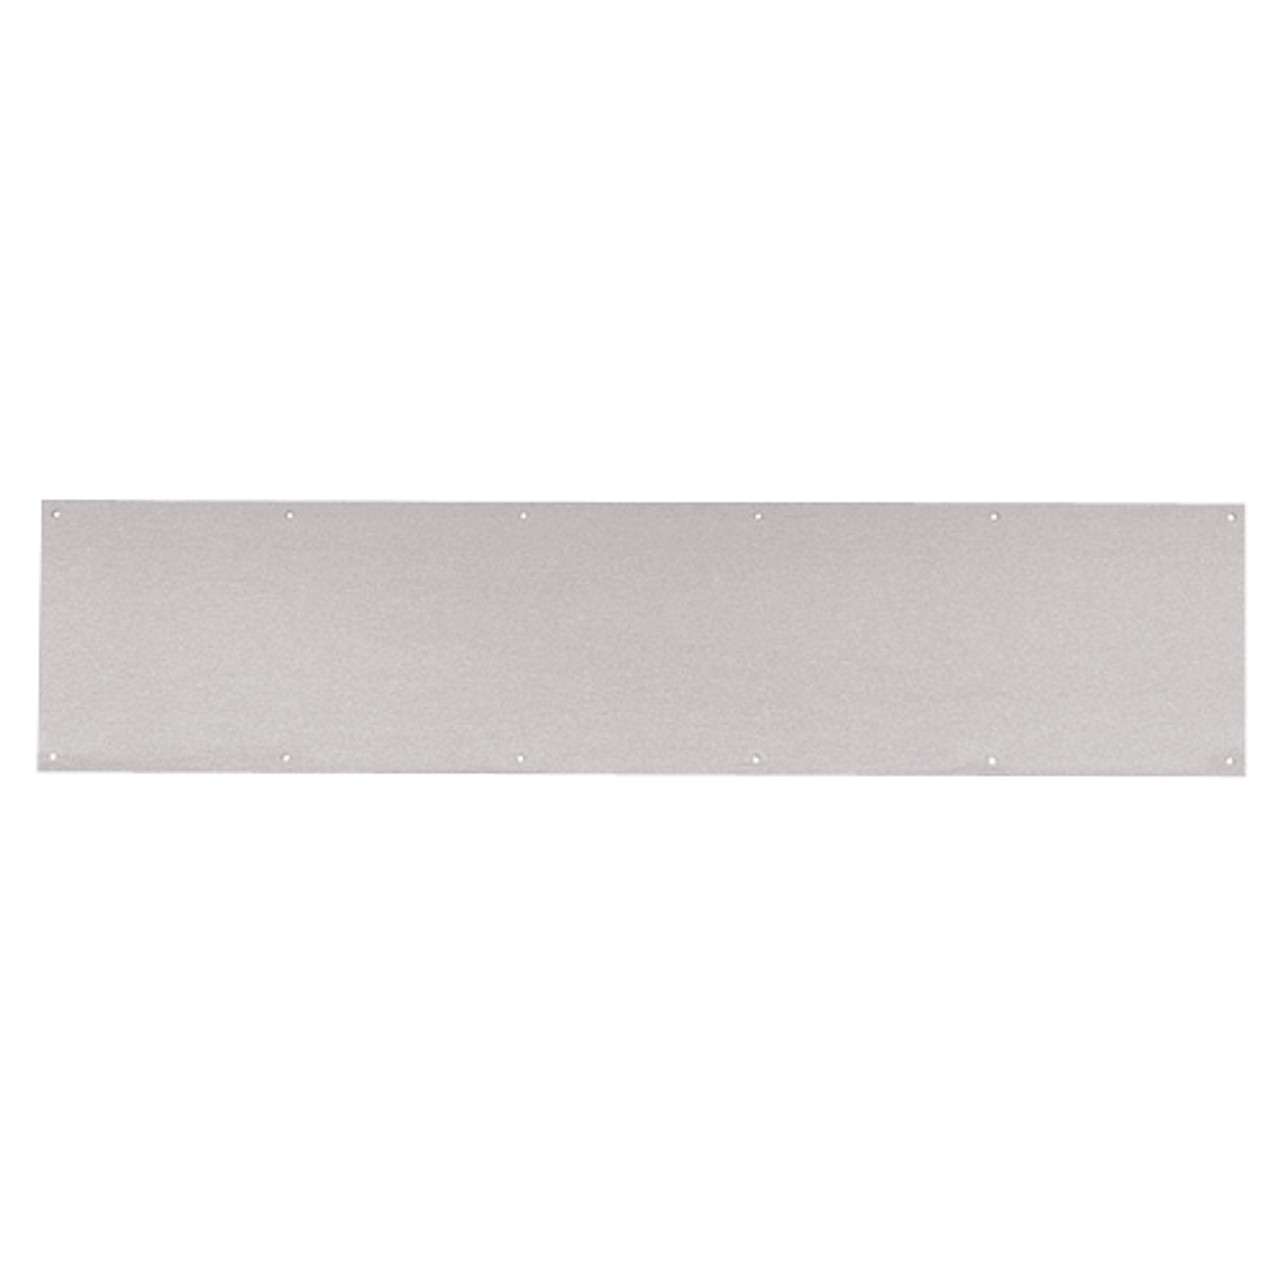 8400-US32D-14x32-B-CS Ives 8400 Series Protection Plate in Satin Stainless Steel